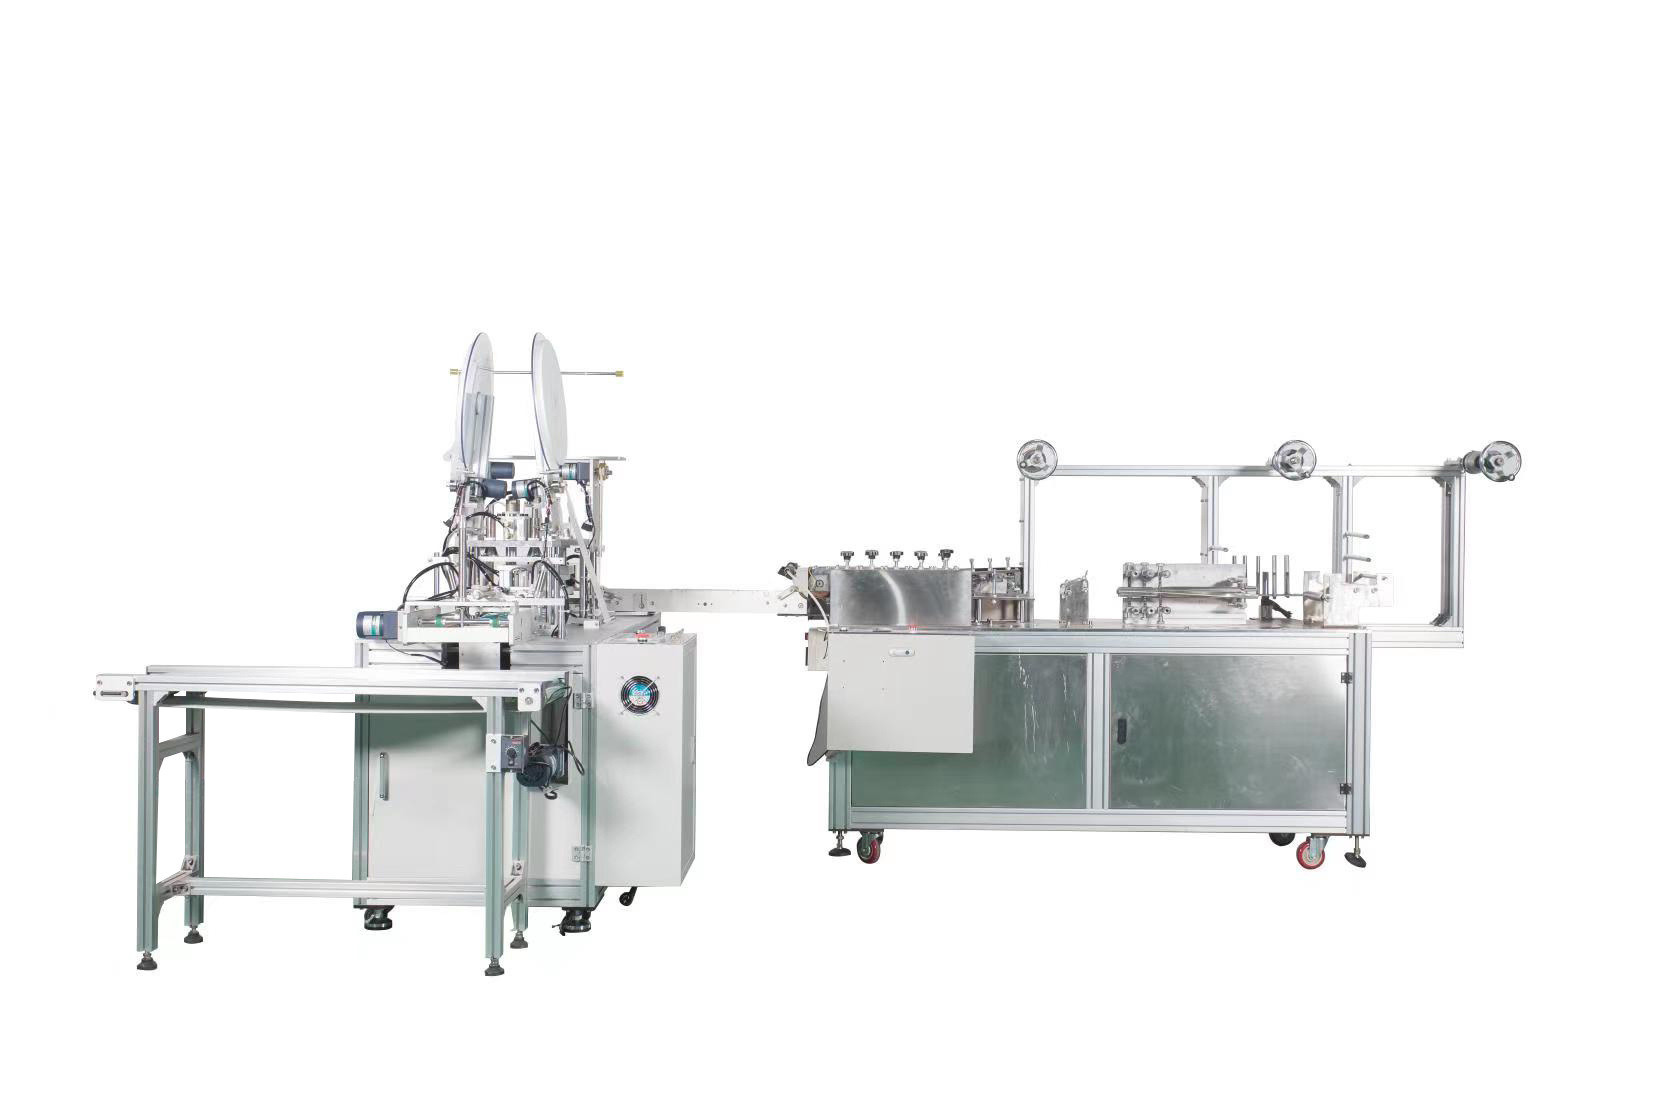 Disposable Face Mask Automatic Feeding Machine (Practical Type)